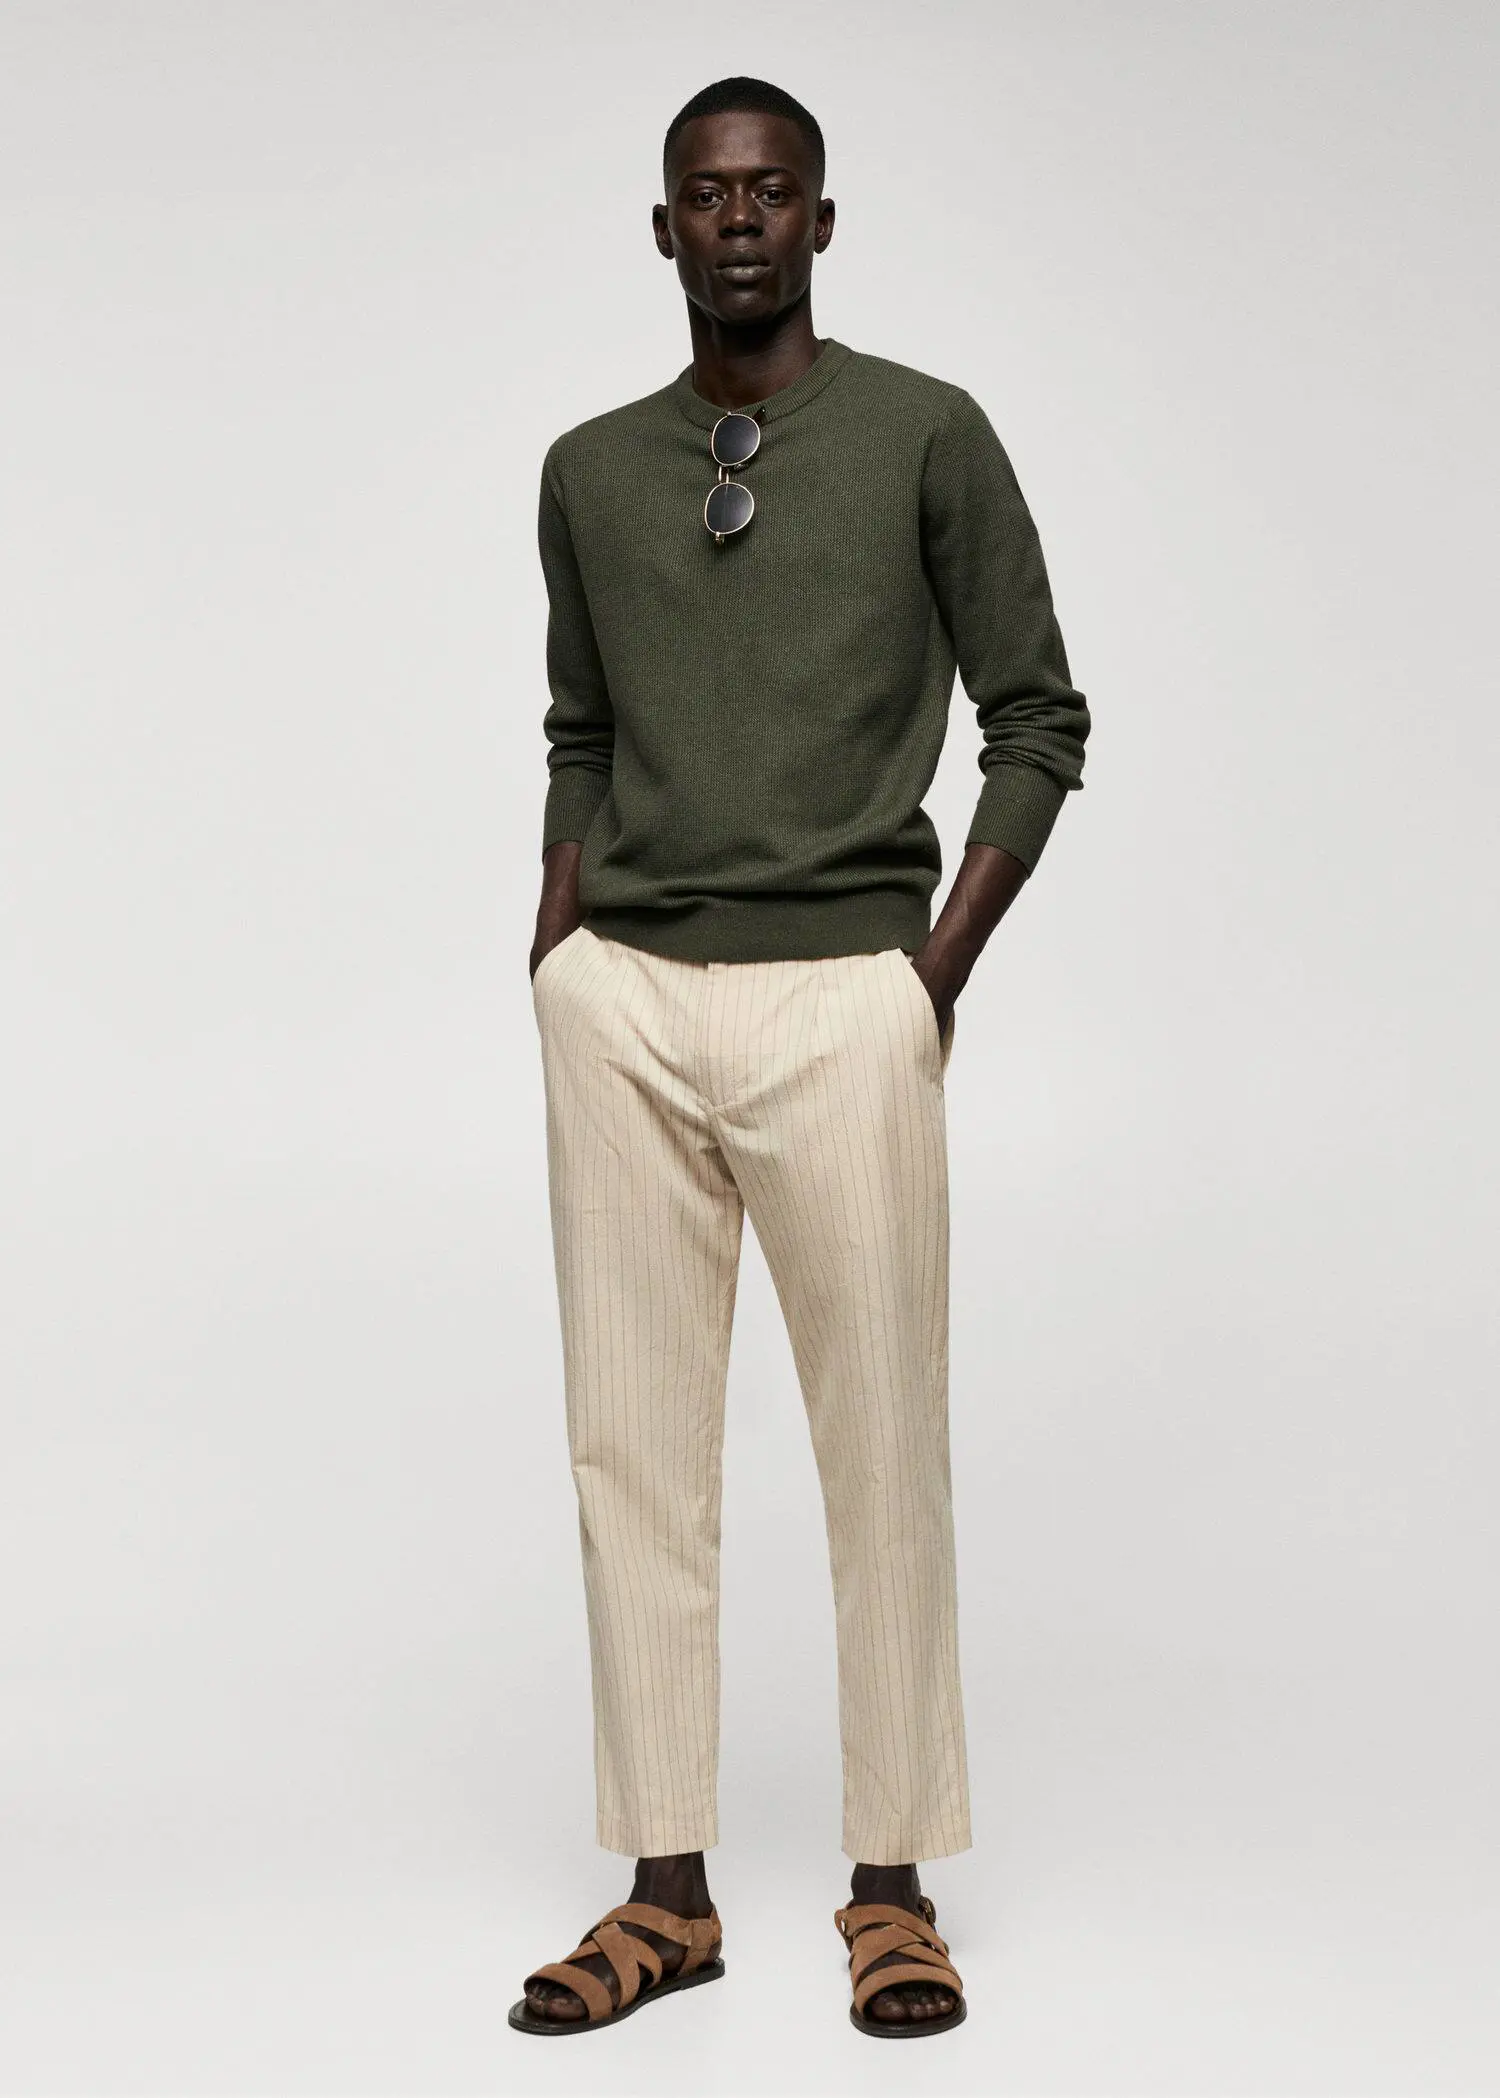 Mango Structured cotton sweater. a man in a green sweater and beige pants. 